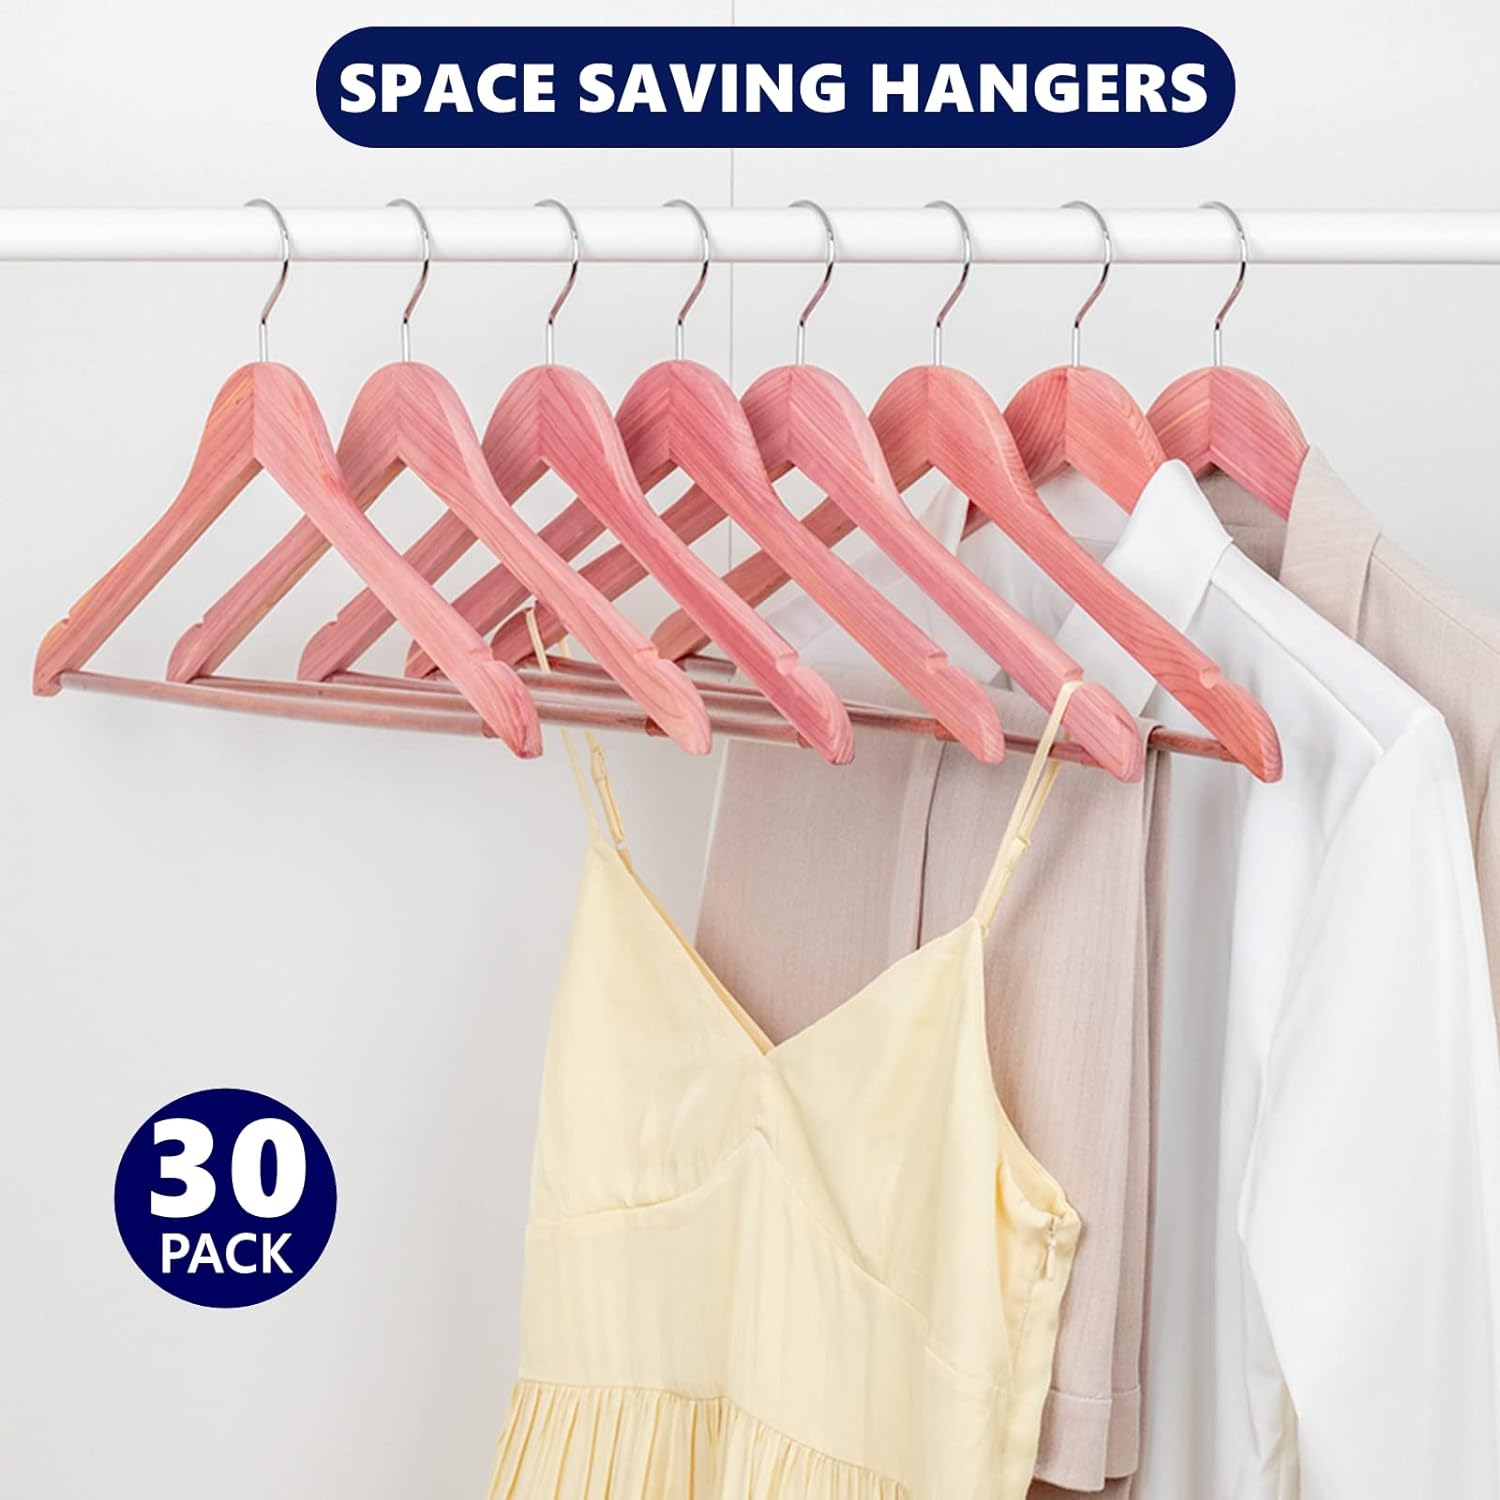 https://bigbigmart.com/wp-content/uploads/2023/12/Amber-Home-American-Red-Cedar-Hangers-30-Pack-Smooth-Finish-Wood-Coat-Hangers-for-Suit-Shirt-Aromatic-Cedar-Clothes-Hangers-with-Swivel-Hook-Notches-for-Dress-Jacket-Pants-Cedar307.jpg